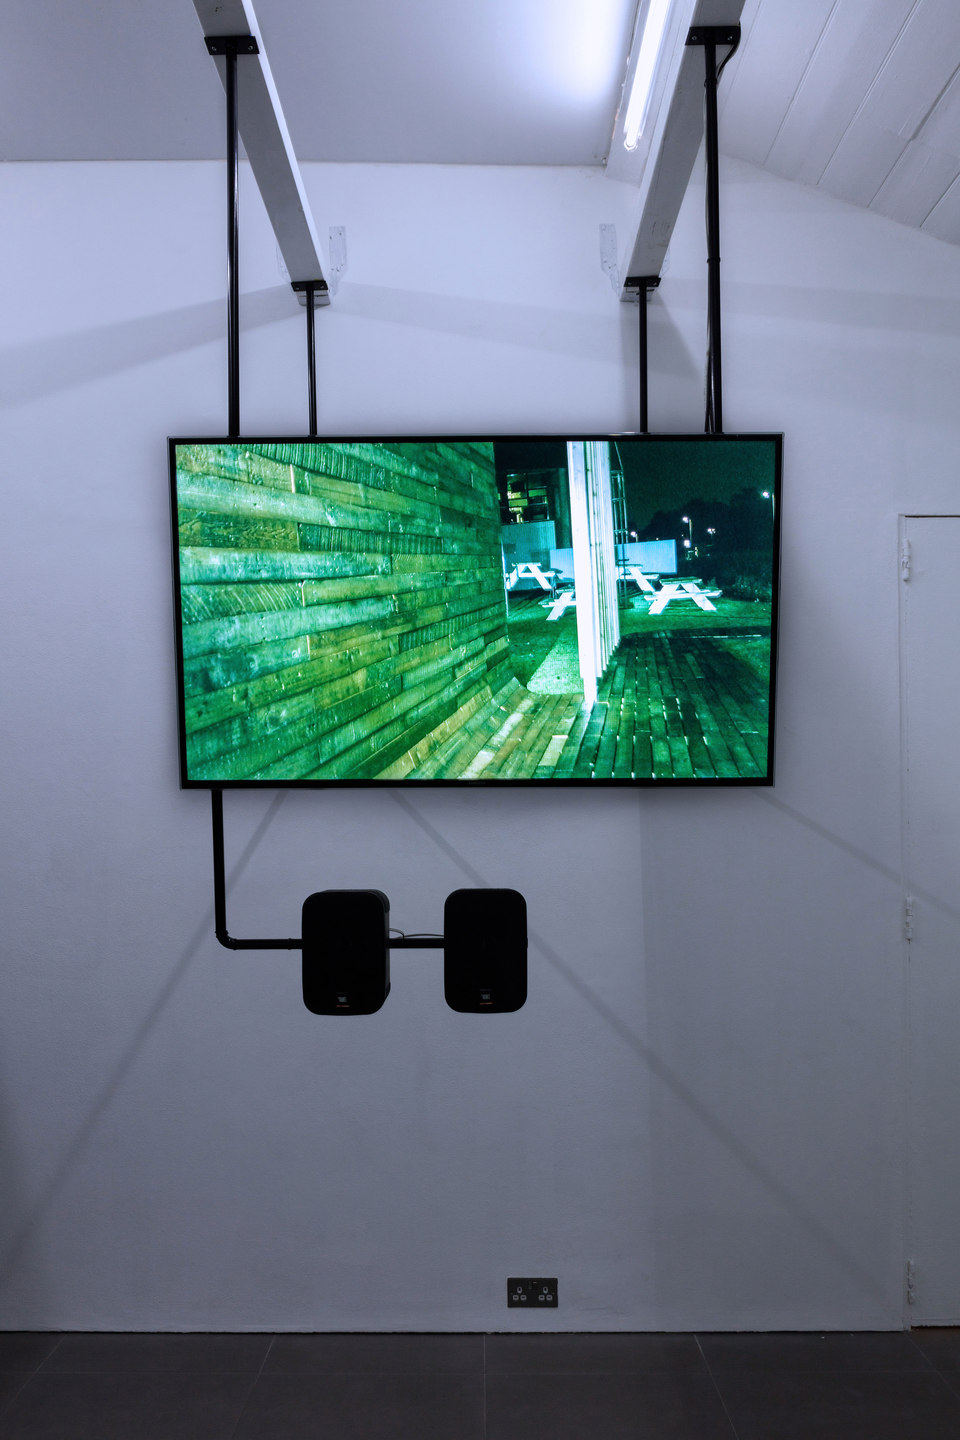 Dan Walwin, Winds 5, 2015 Sculpture, video: Winds 5 Cess, Jel Ever Terrass? 4 pieces Including 1 Monitor & 1 set of speakers Samsung UE48H6400, JBL Control 1PRO speakers,  Cell Project Space